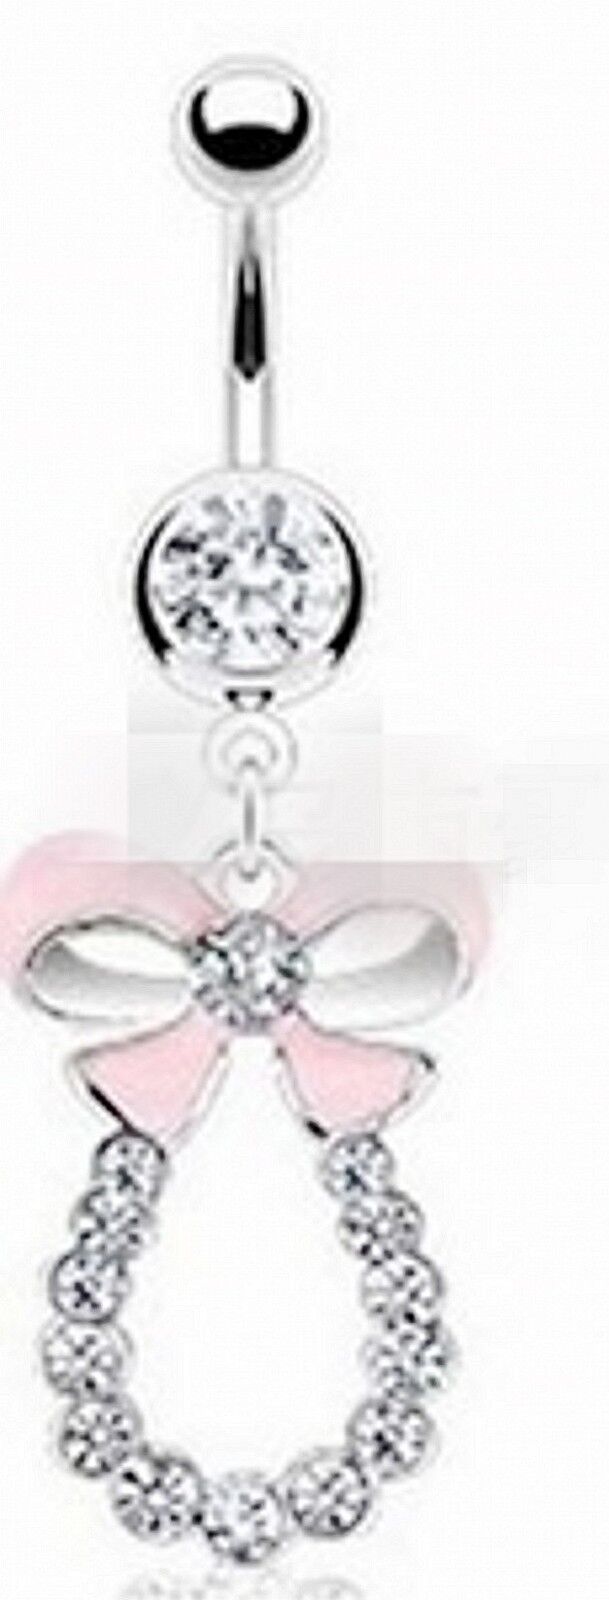 Women Bow 316L Surgical Stainless Steel Belly Navel Bar Body Piercing Jewellery